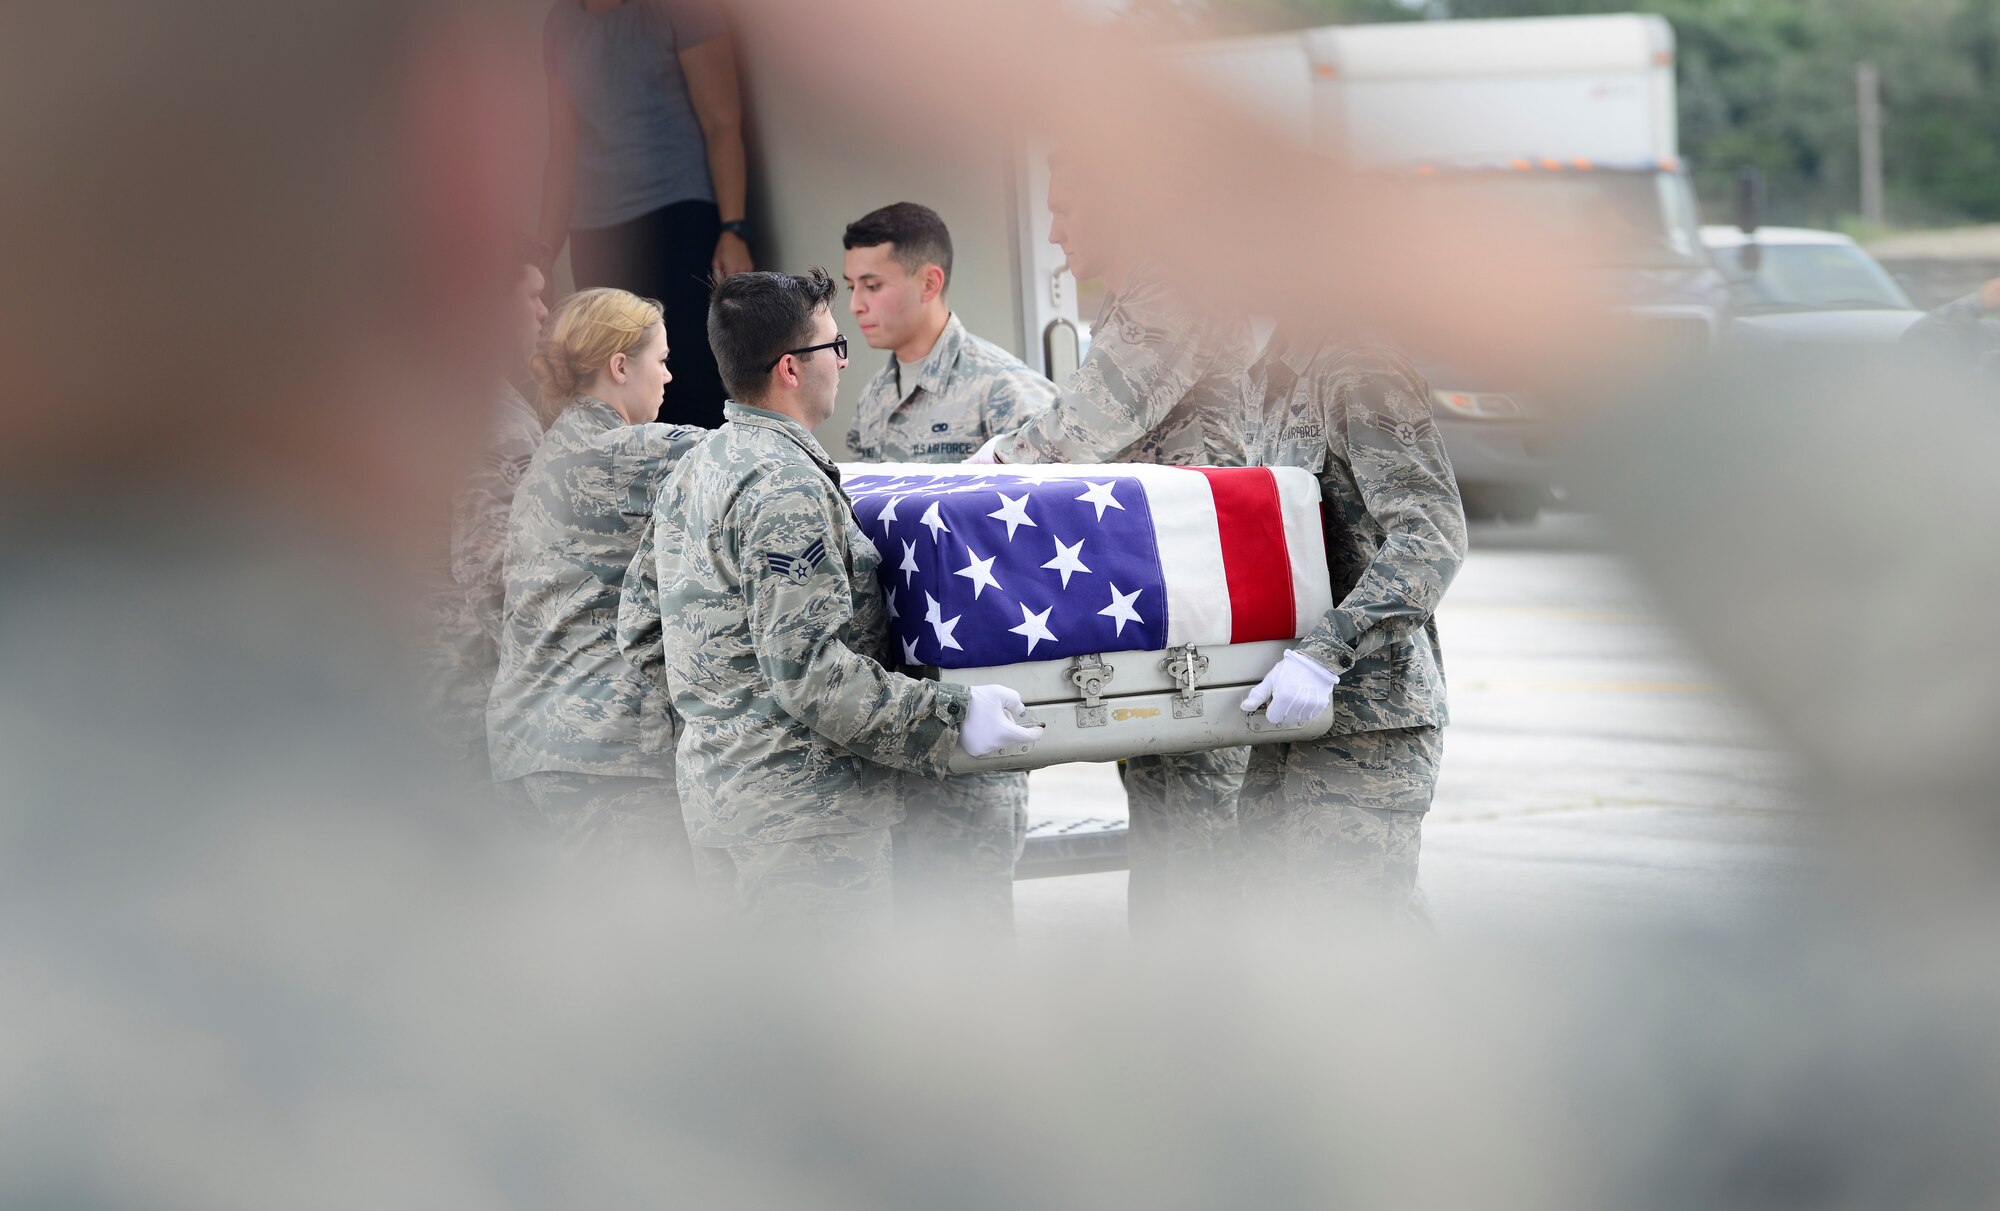 Attendees salute the remains of WWII heroes as they are moved during a flight line ceremony Sept. 14, 2018, at Offutt Air Force Base, Nebraska. Aircrew from Joint Base Charleston, S.C. was tasked to deliver the remains due to its rapid mobility capabilities.